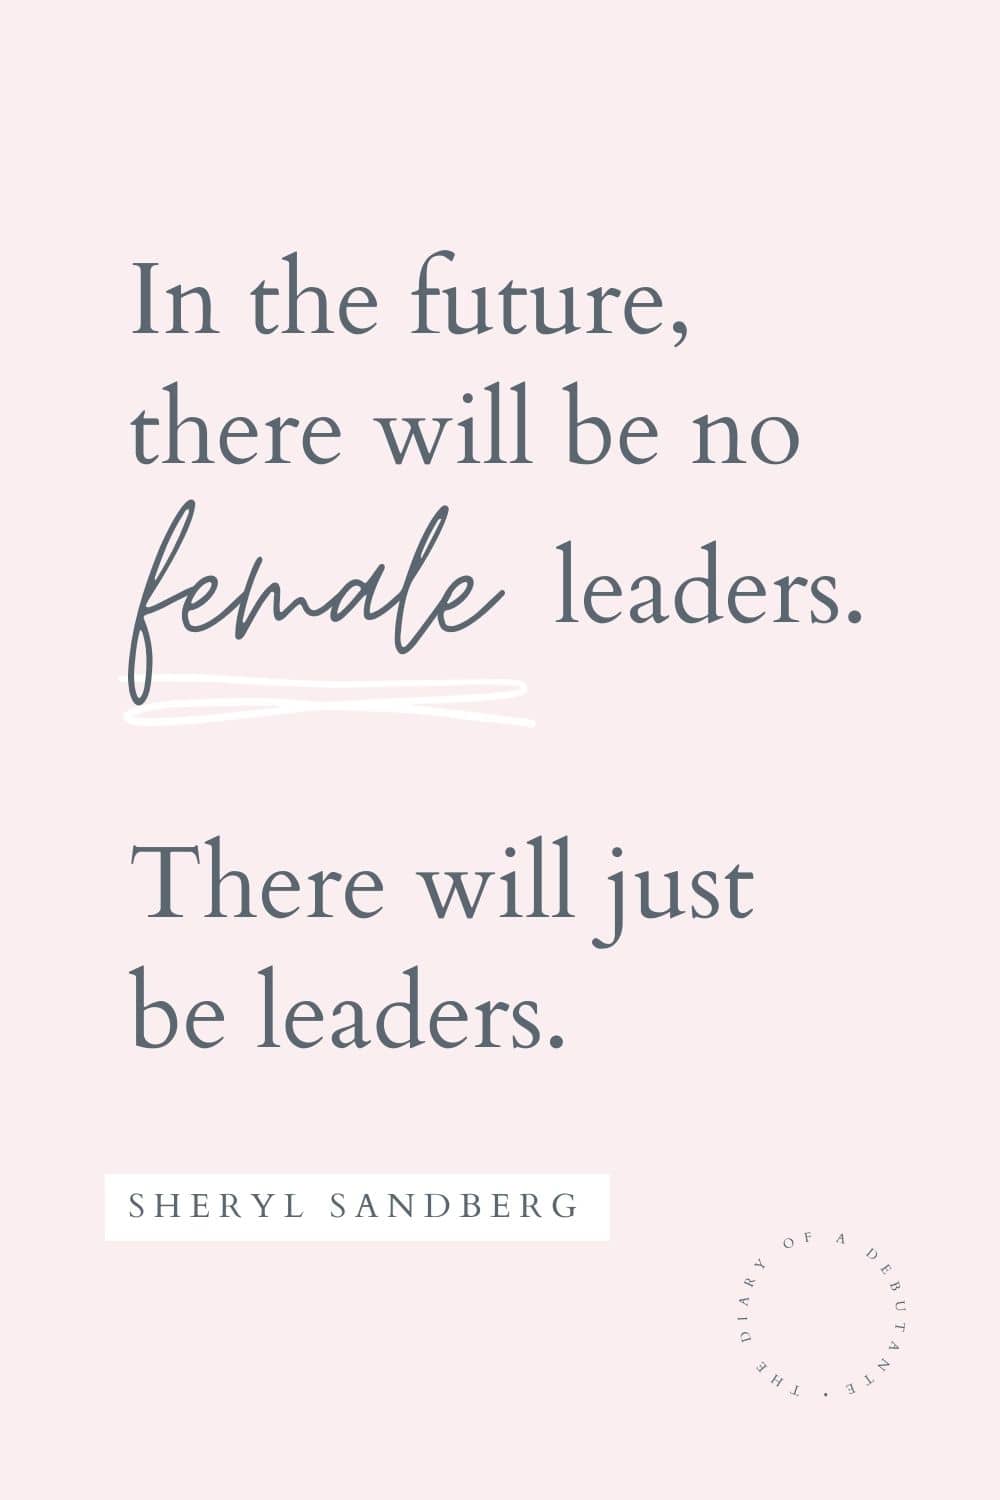 Inspirational Sheryl Sandberg quote about female leaders curated by blogger Stephanie Ziajka as part of a collection of inspirational quotes for working women during Women's History Month on Diary of a Debutante